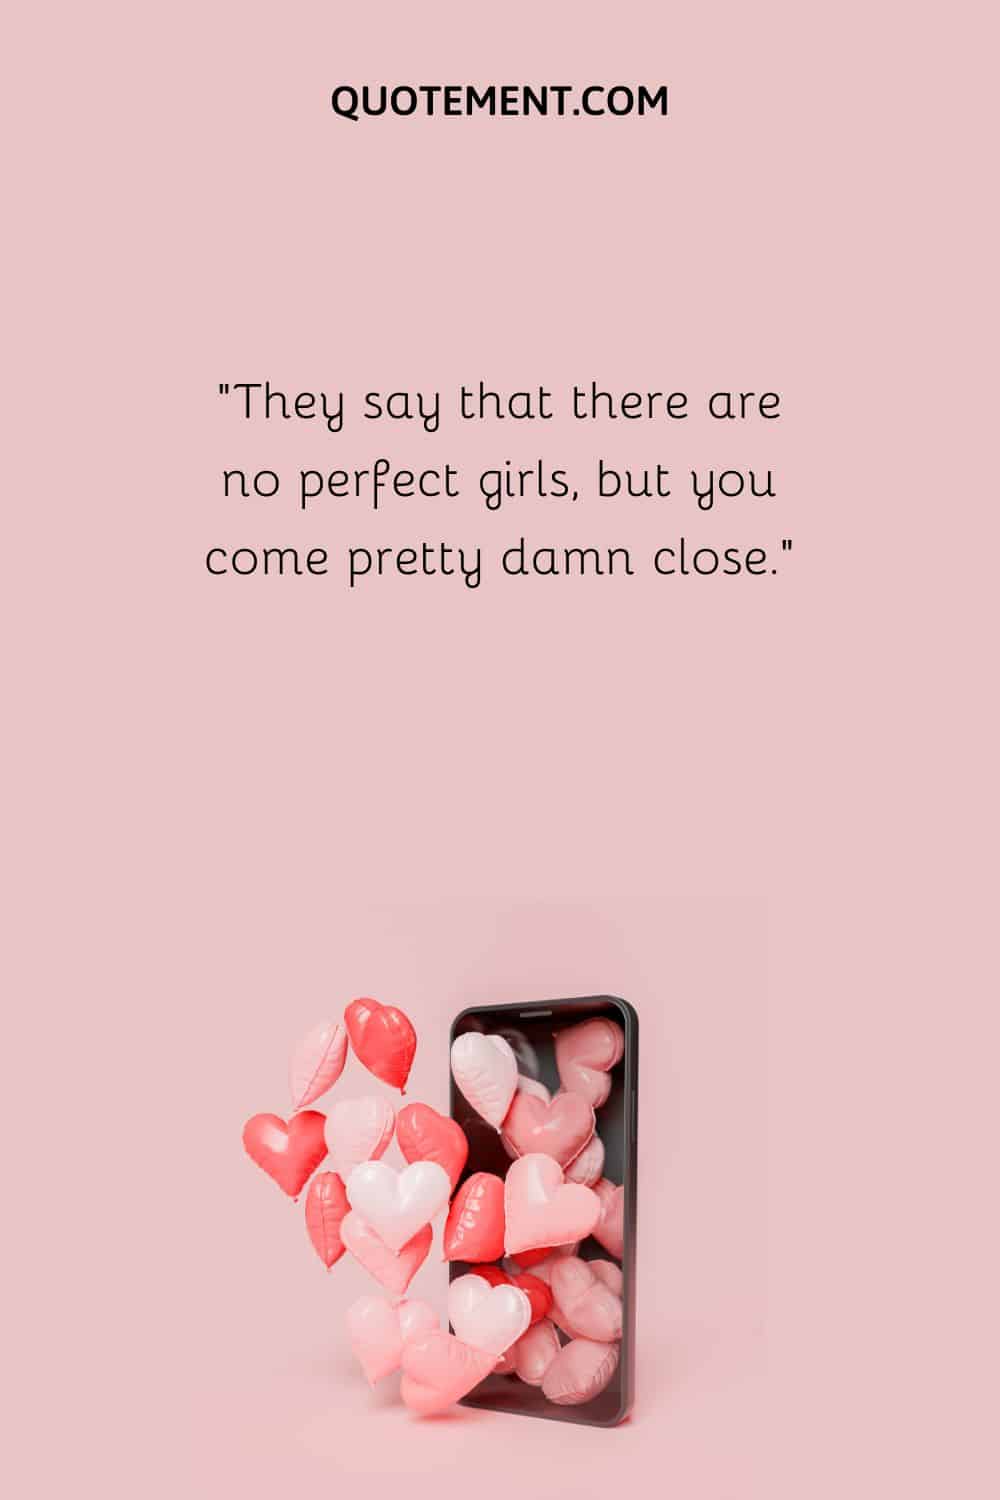 “They say that there are no perfect girls, but you come pretty damn close.”